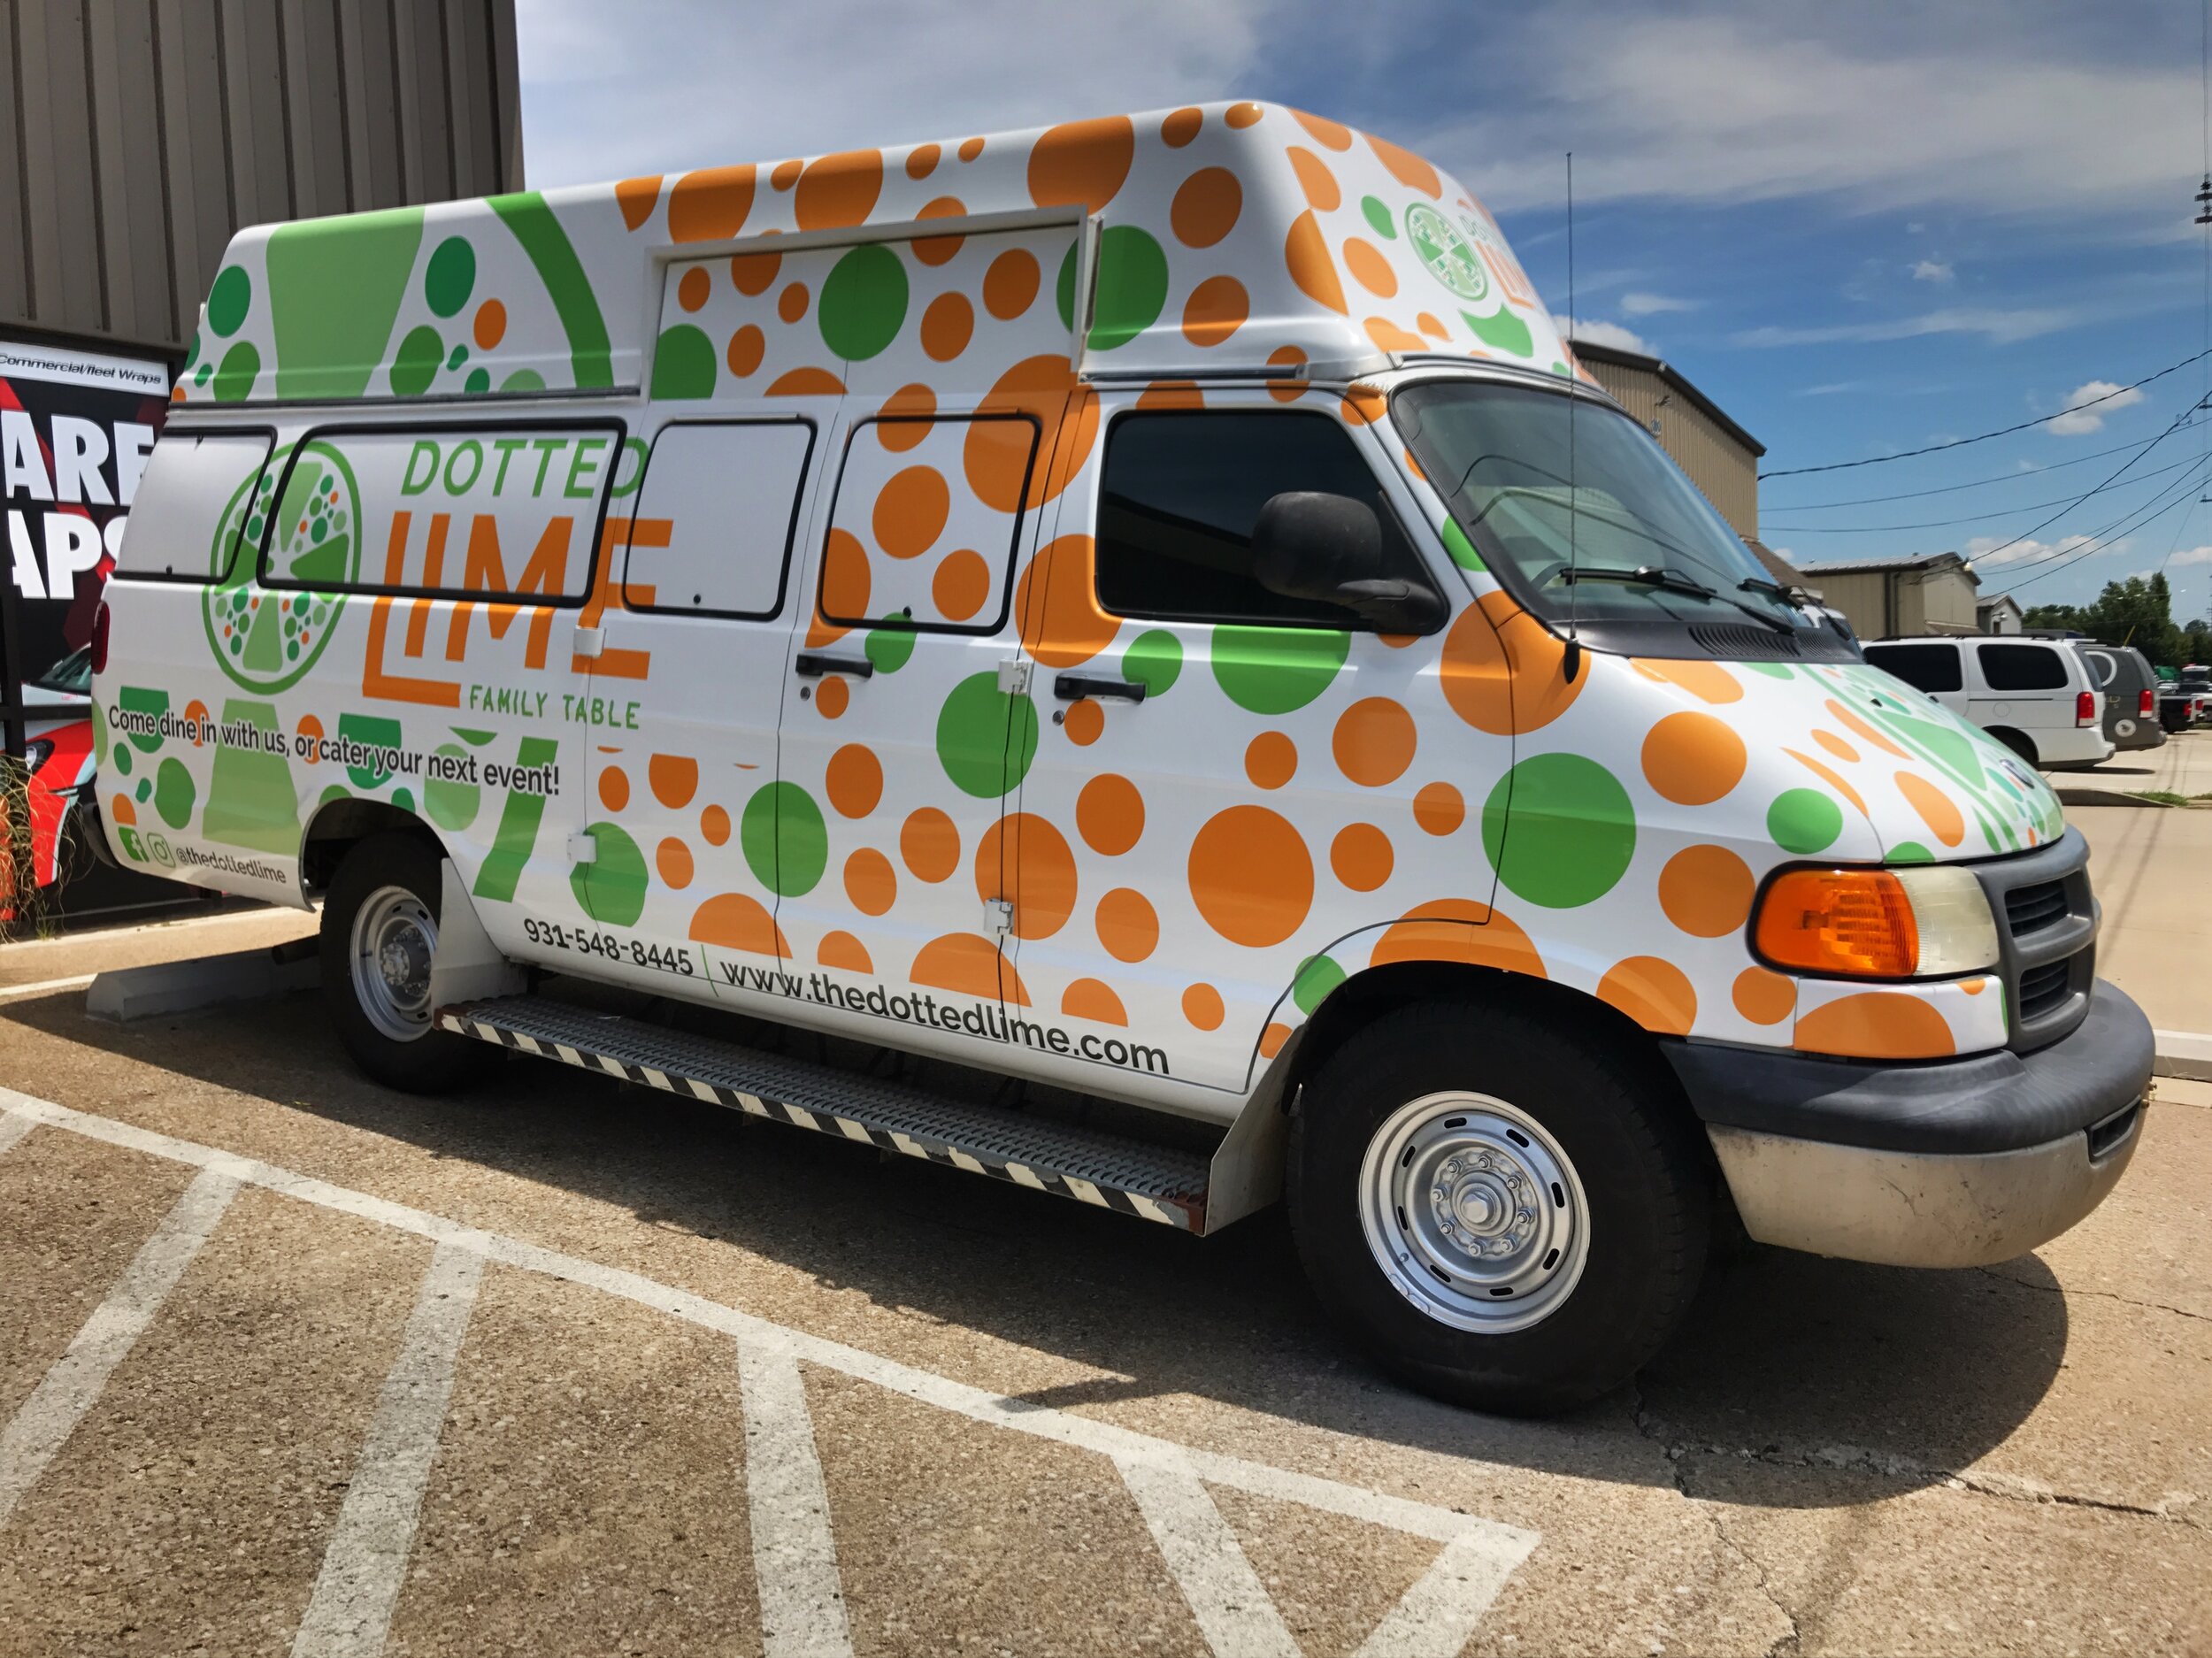 Label Graphics Co Franklin TN Vehicle Wraps Wrap Design Print Install 37064 dotted lime van wrap.JPG